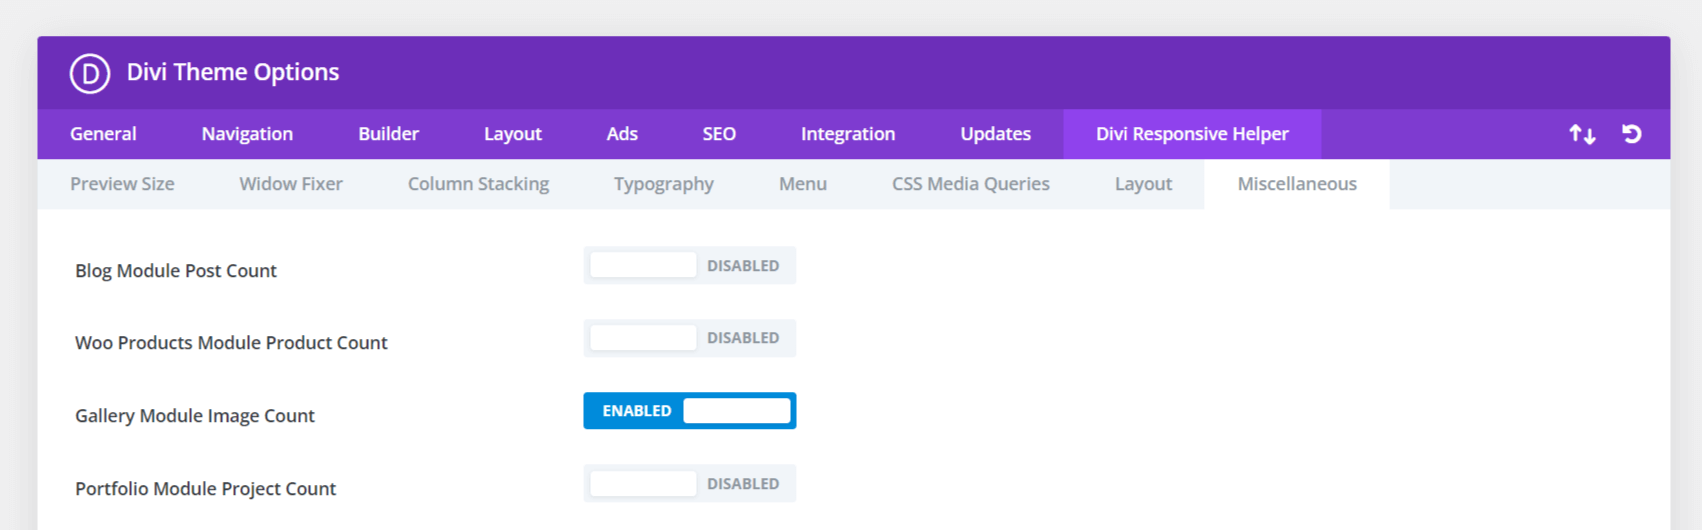 Divi Theme Options Gallery Module Image Count setting